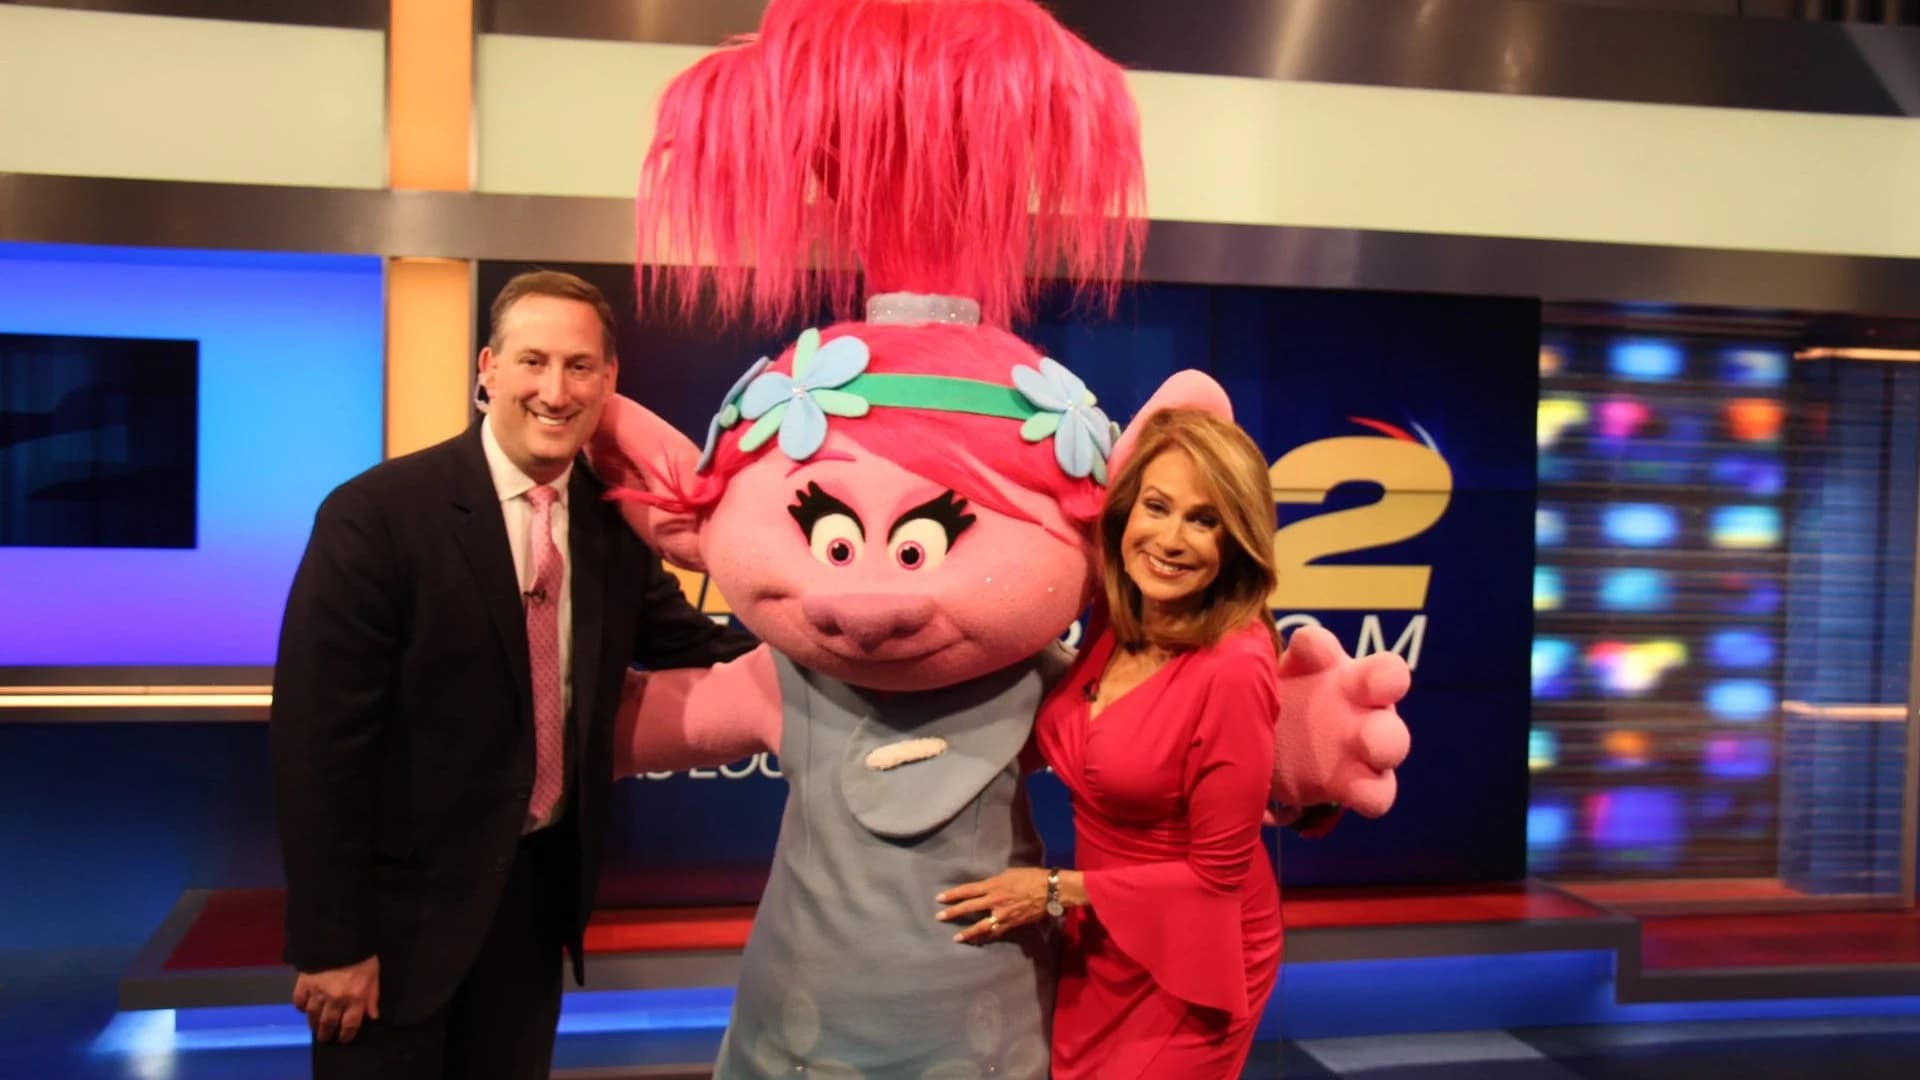 The Trolls Experience comes to News 12 studios